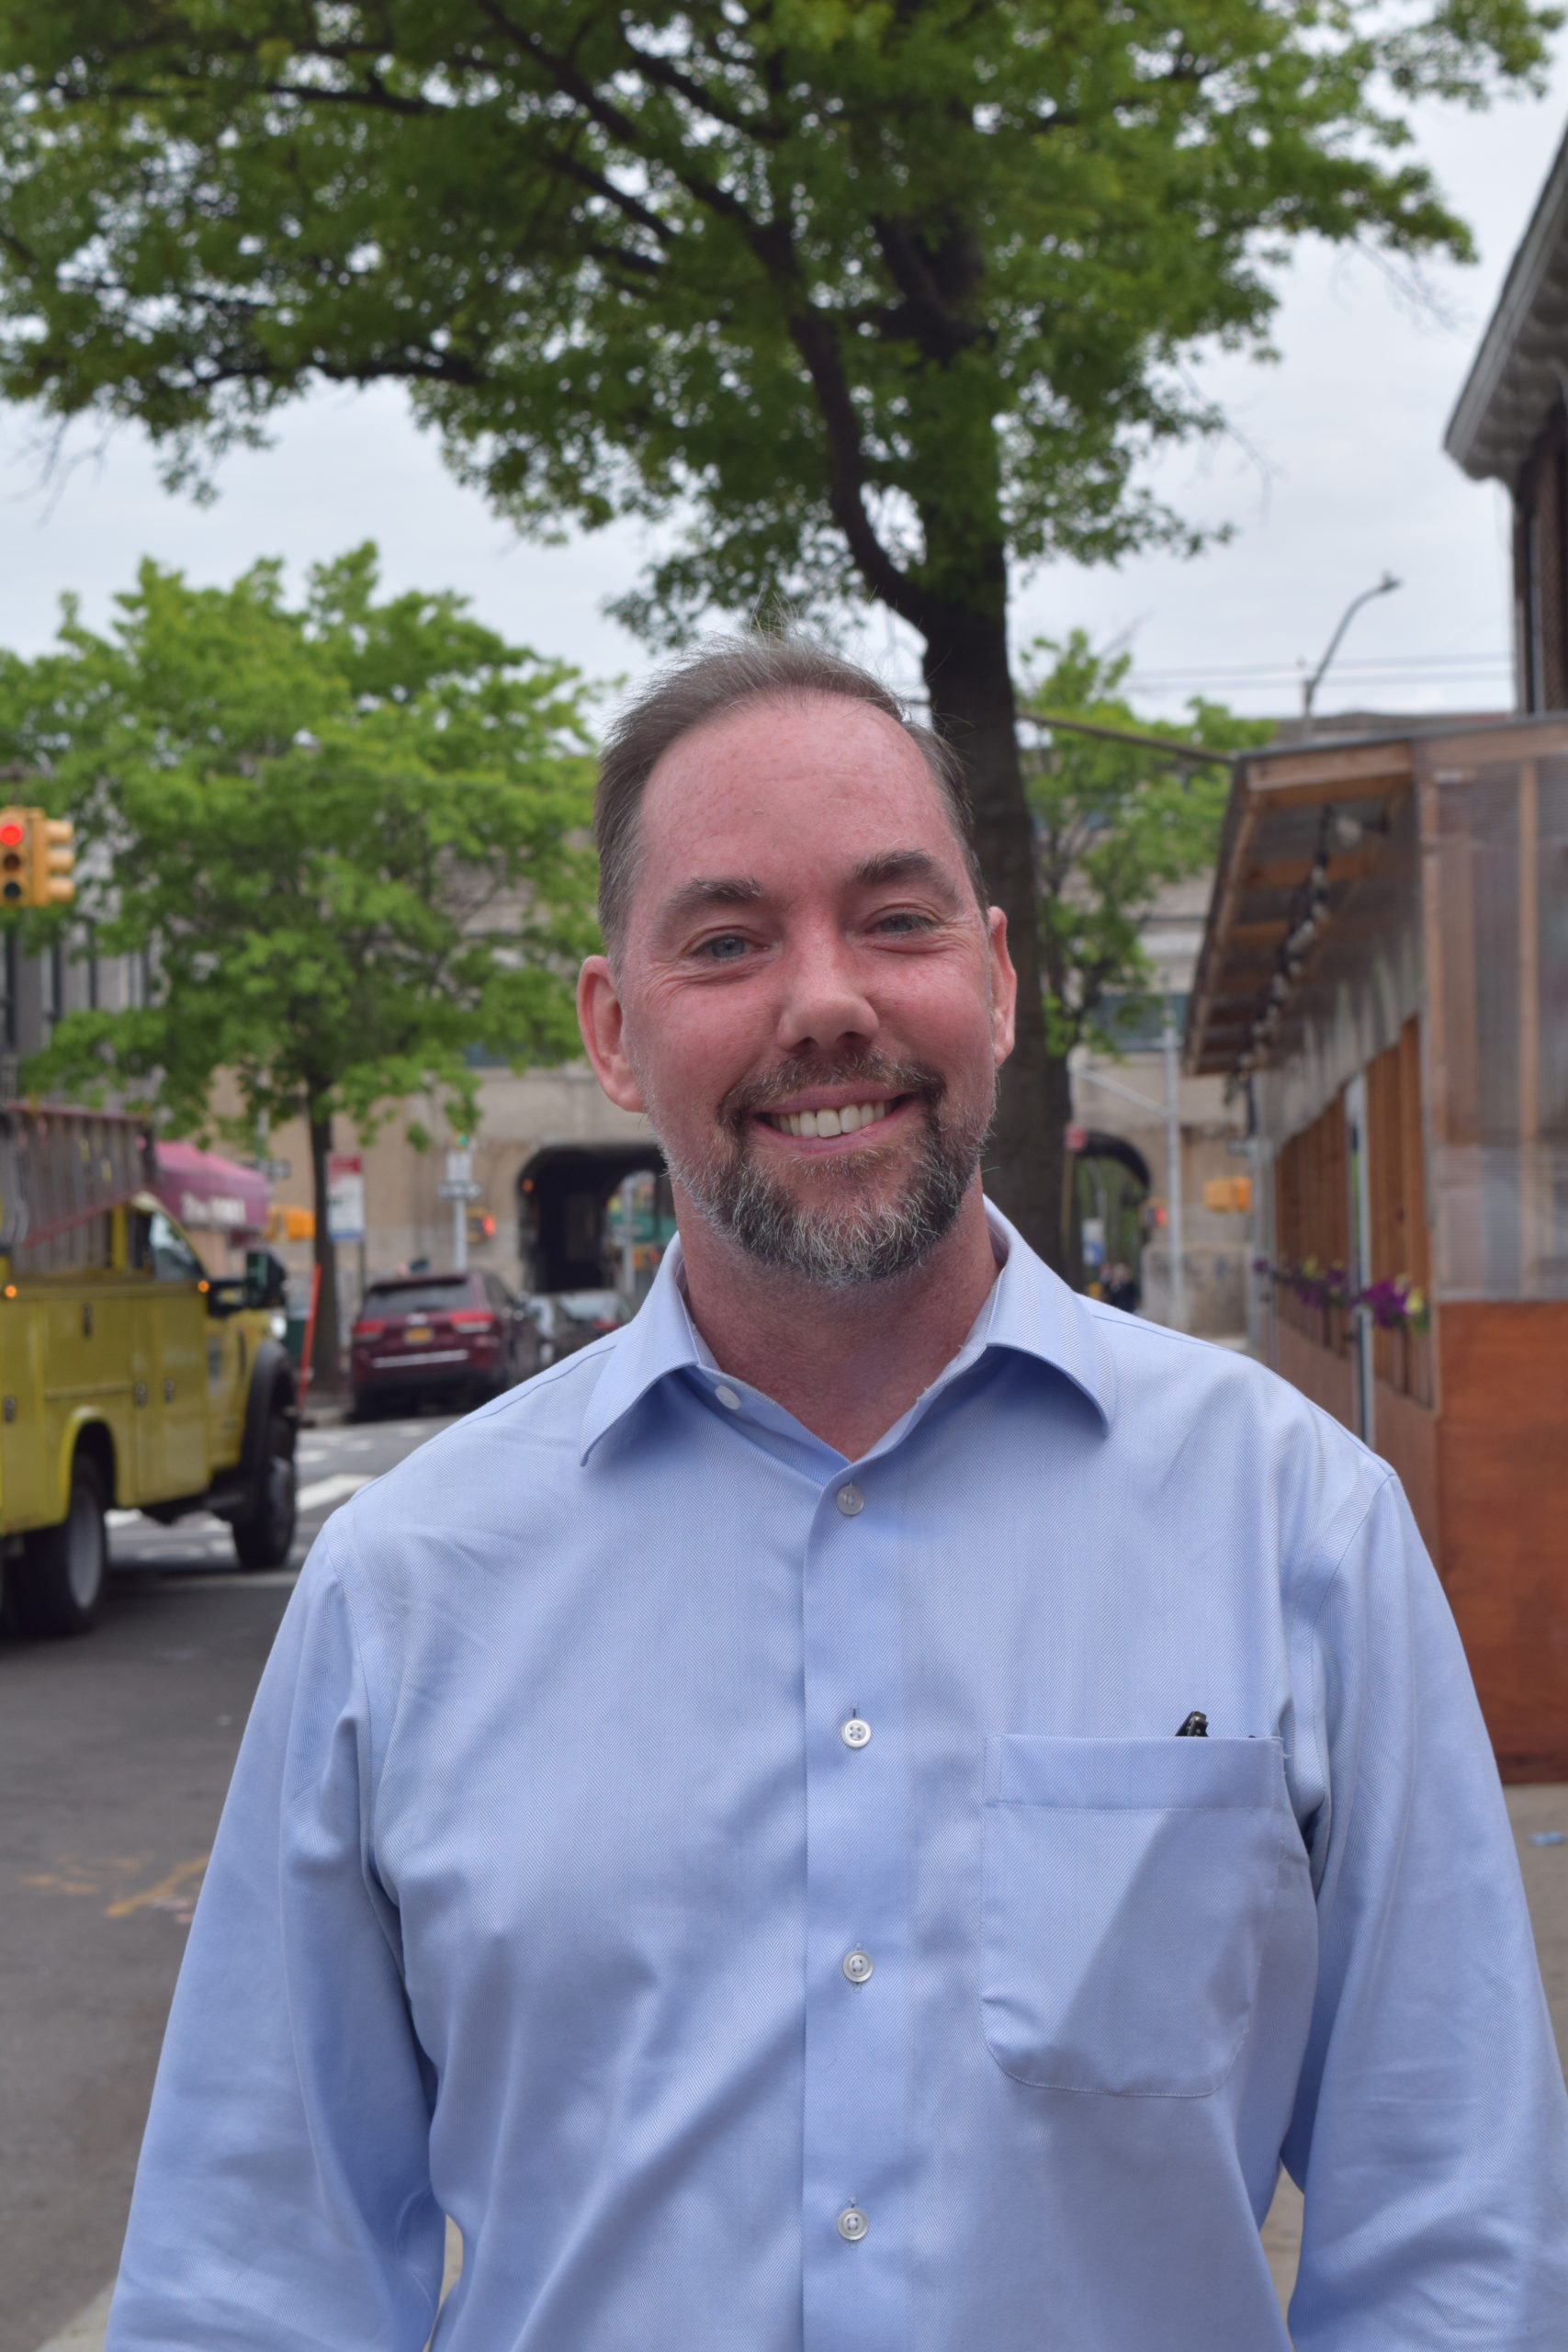 2022 Election Profile: Assembly Candidate Brent O’Leary